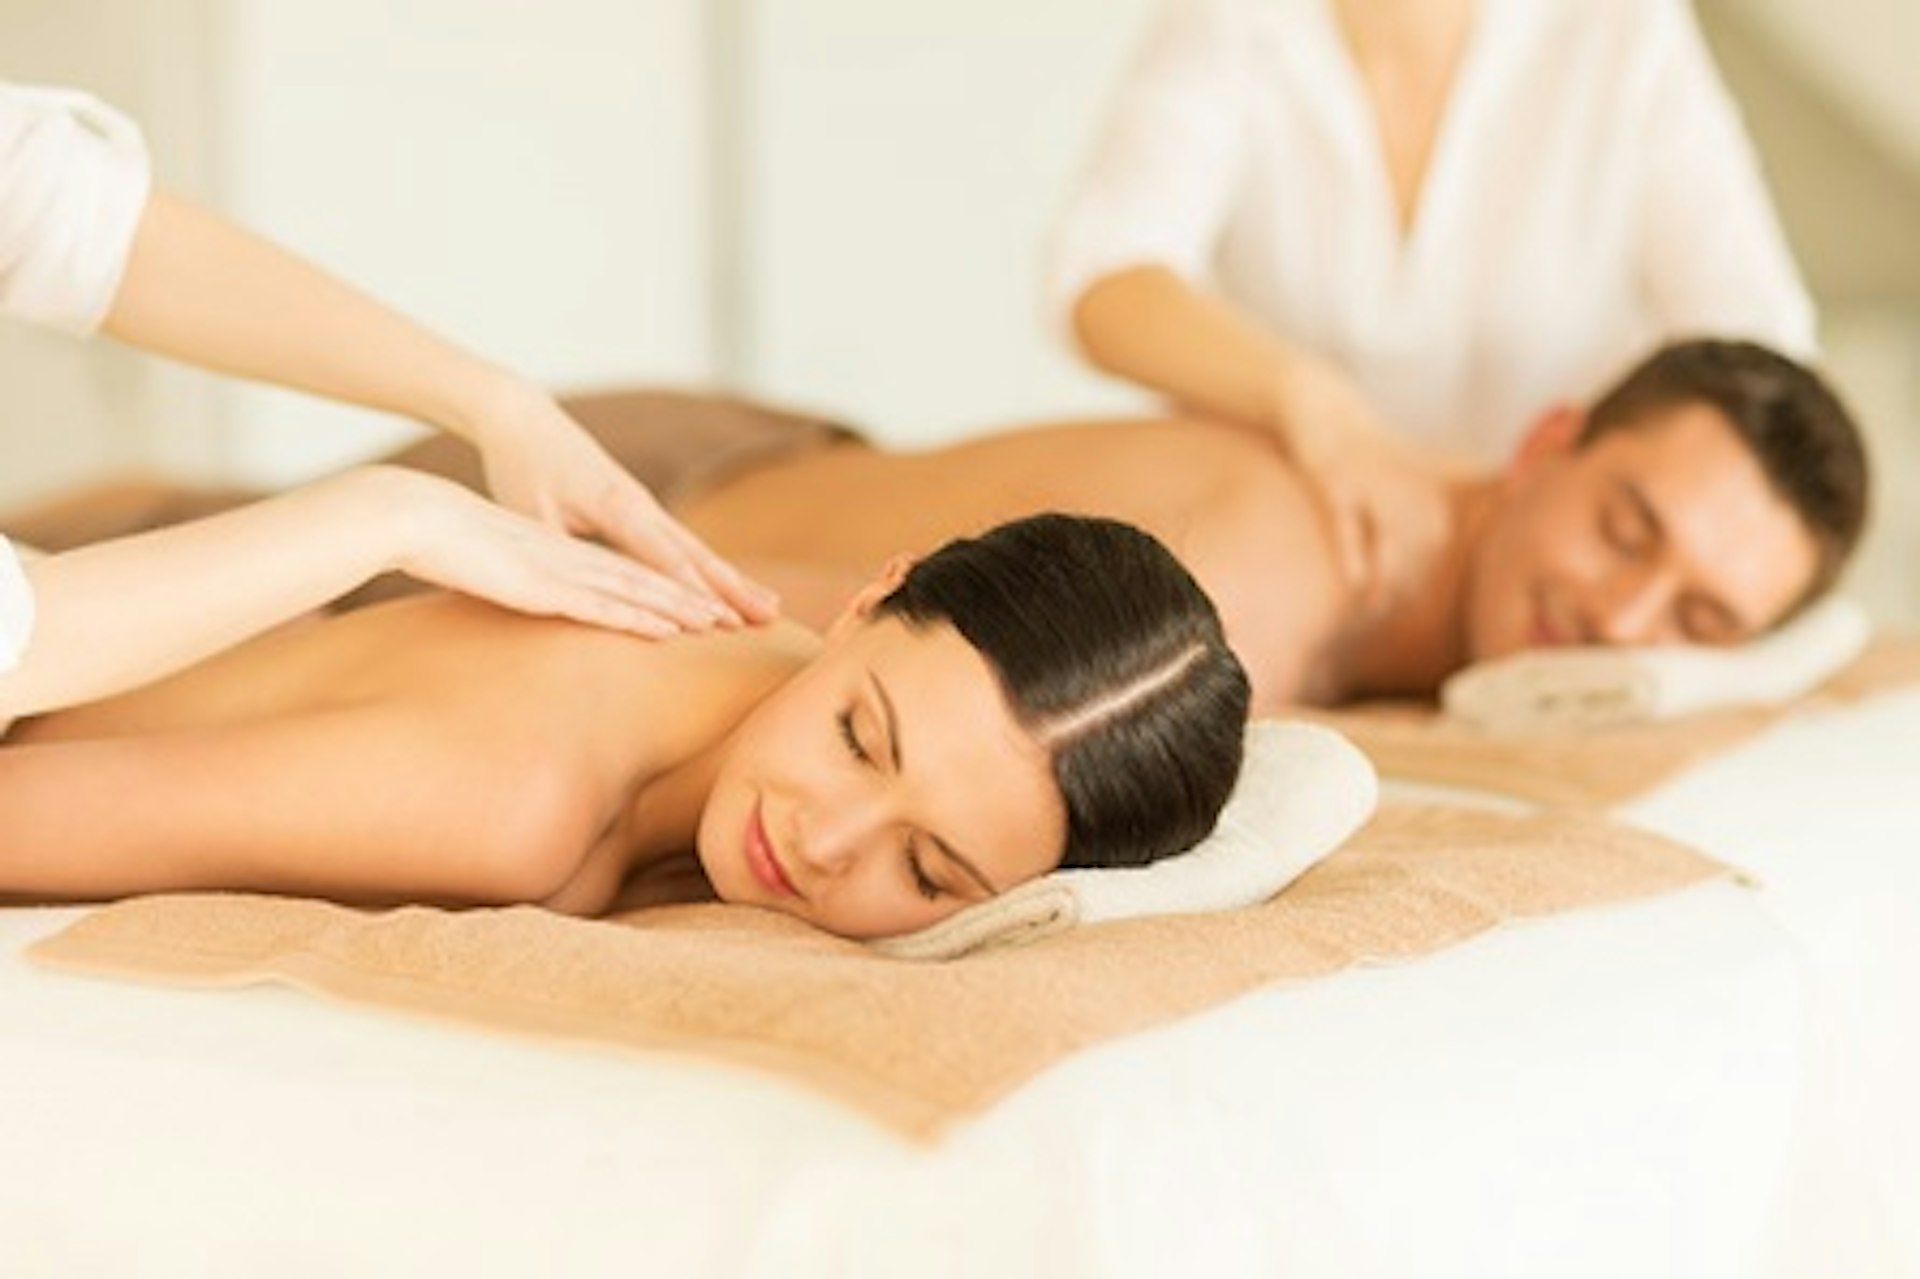 Pamper Treat for Two at a Spirit Health Club 1